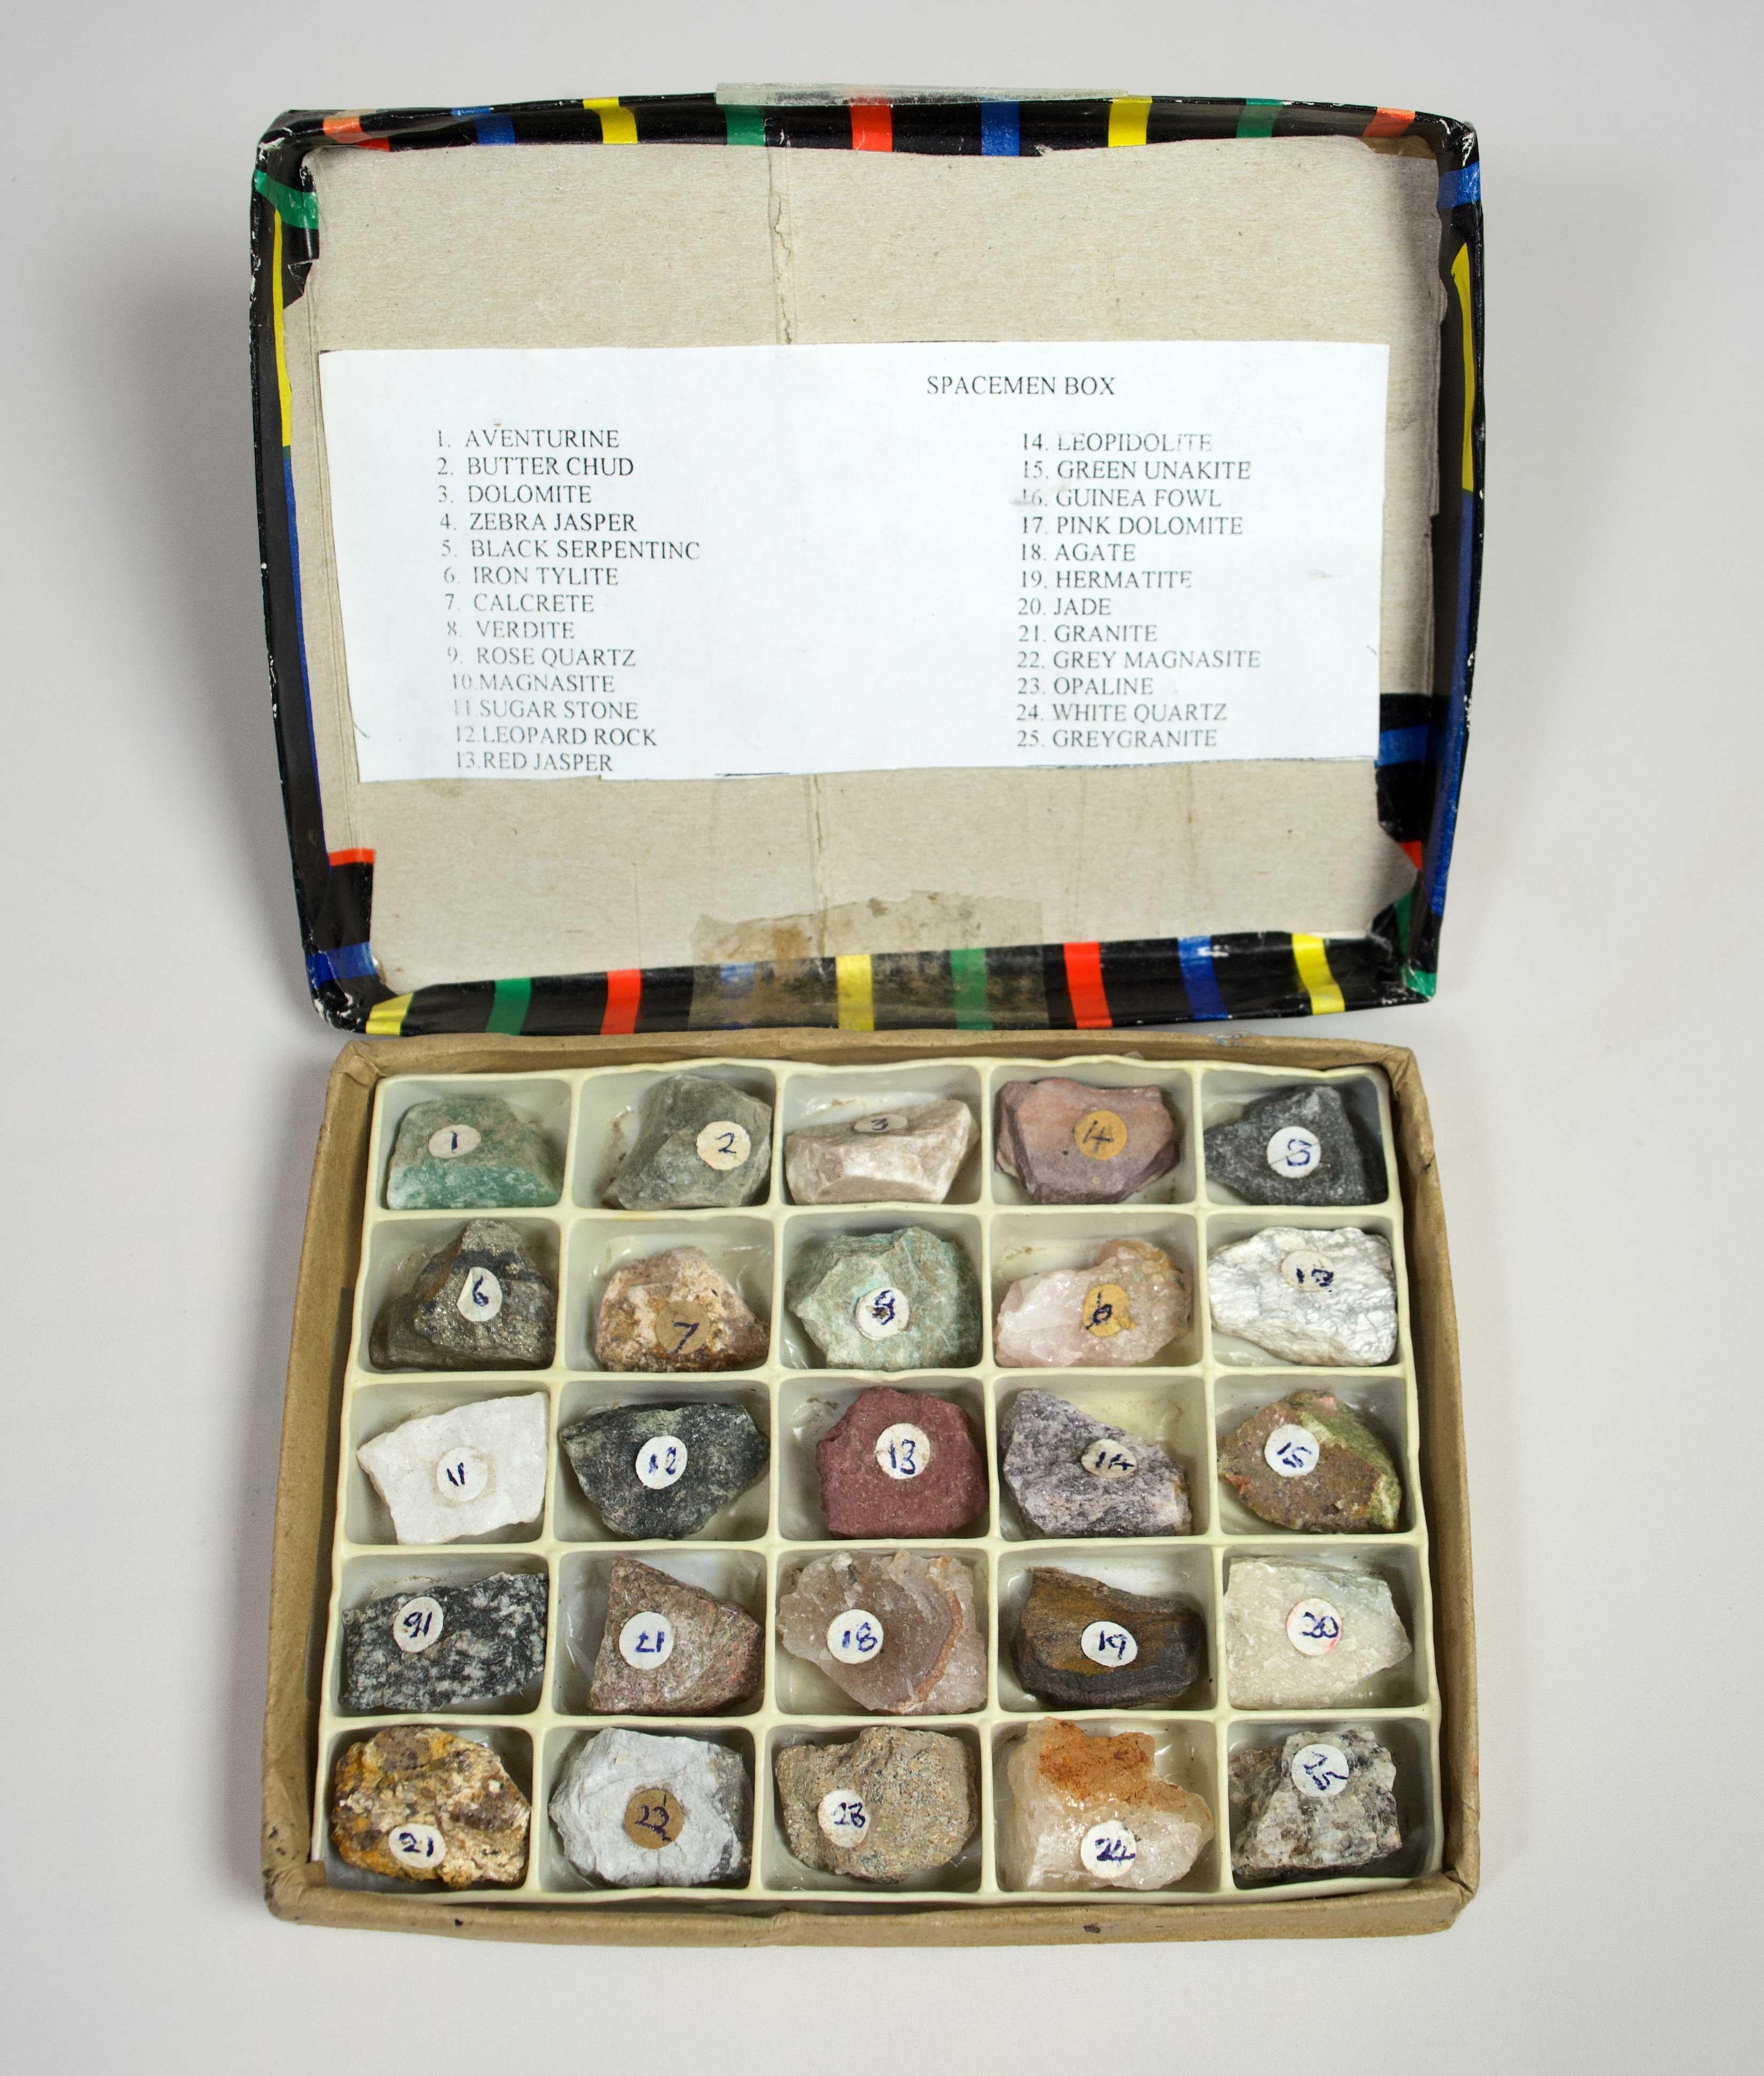 25 Shona Stone Samples with Specimen Box - Mixed Media Art by Unknown